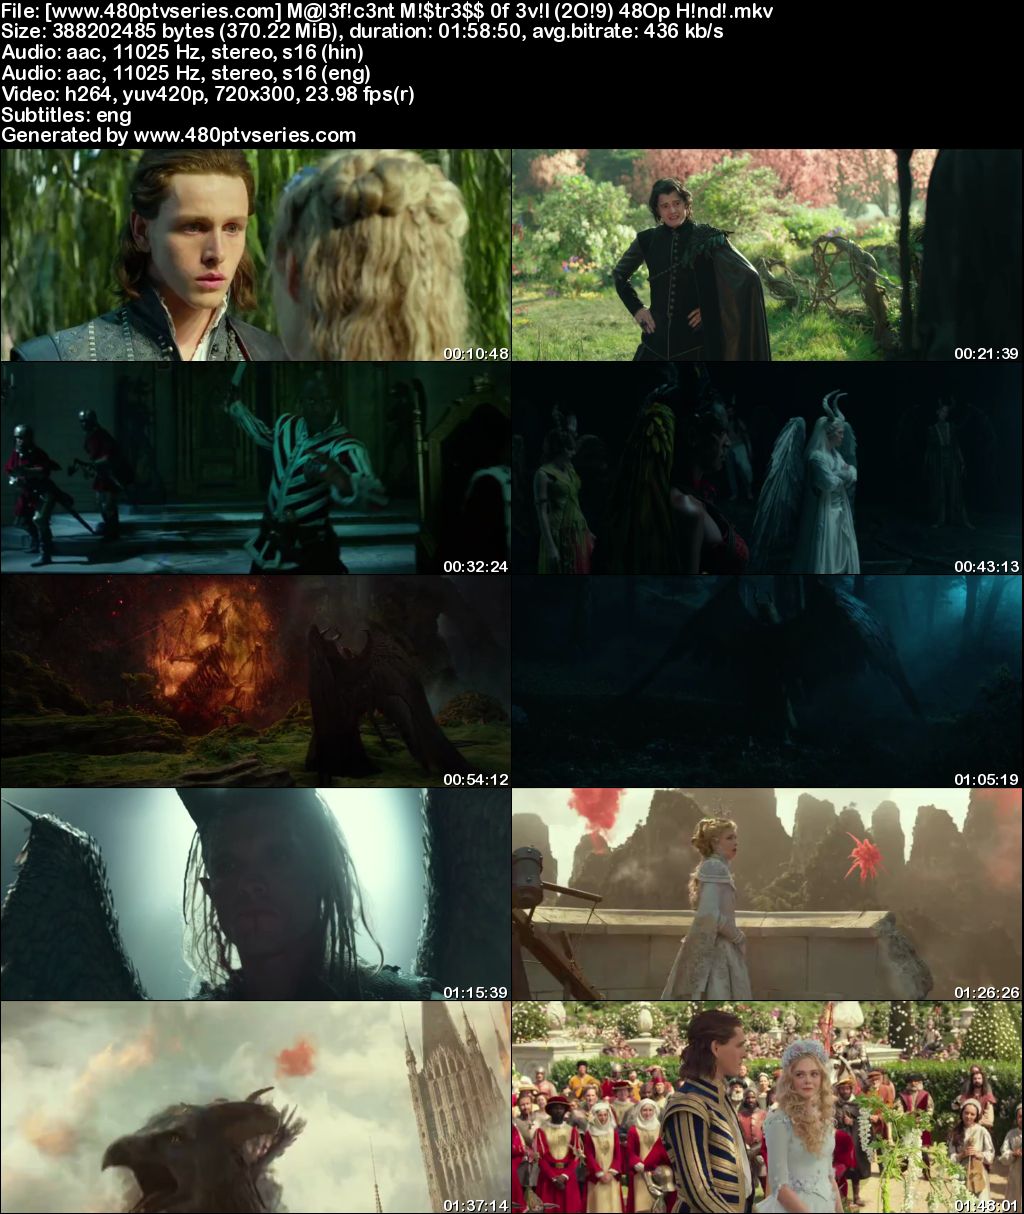 Maleficent: Mistress of Evil (2019) 350MB Full Hindi Dual Audio Movie Download 480p Bluray Free Watch Online Full Movie Download Worldfree4u 9xmovies